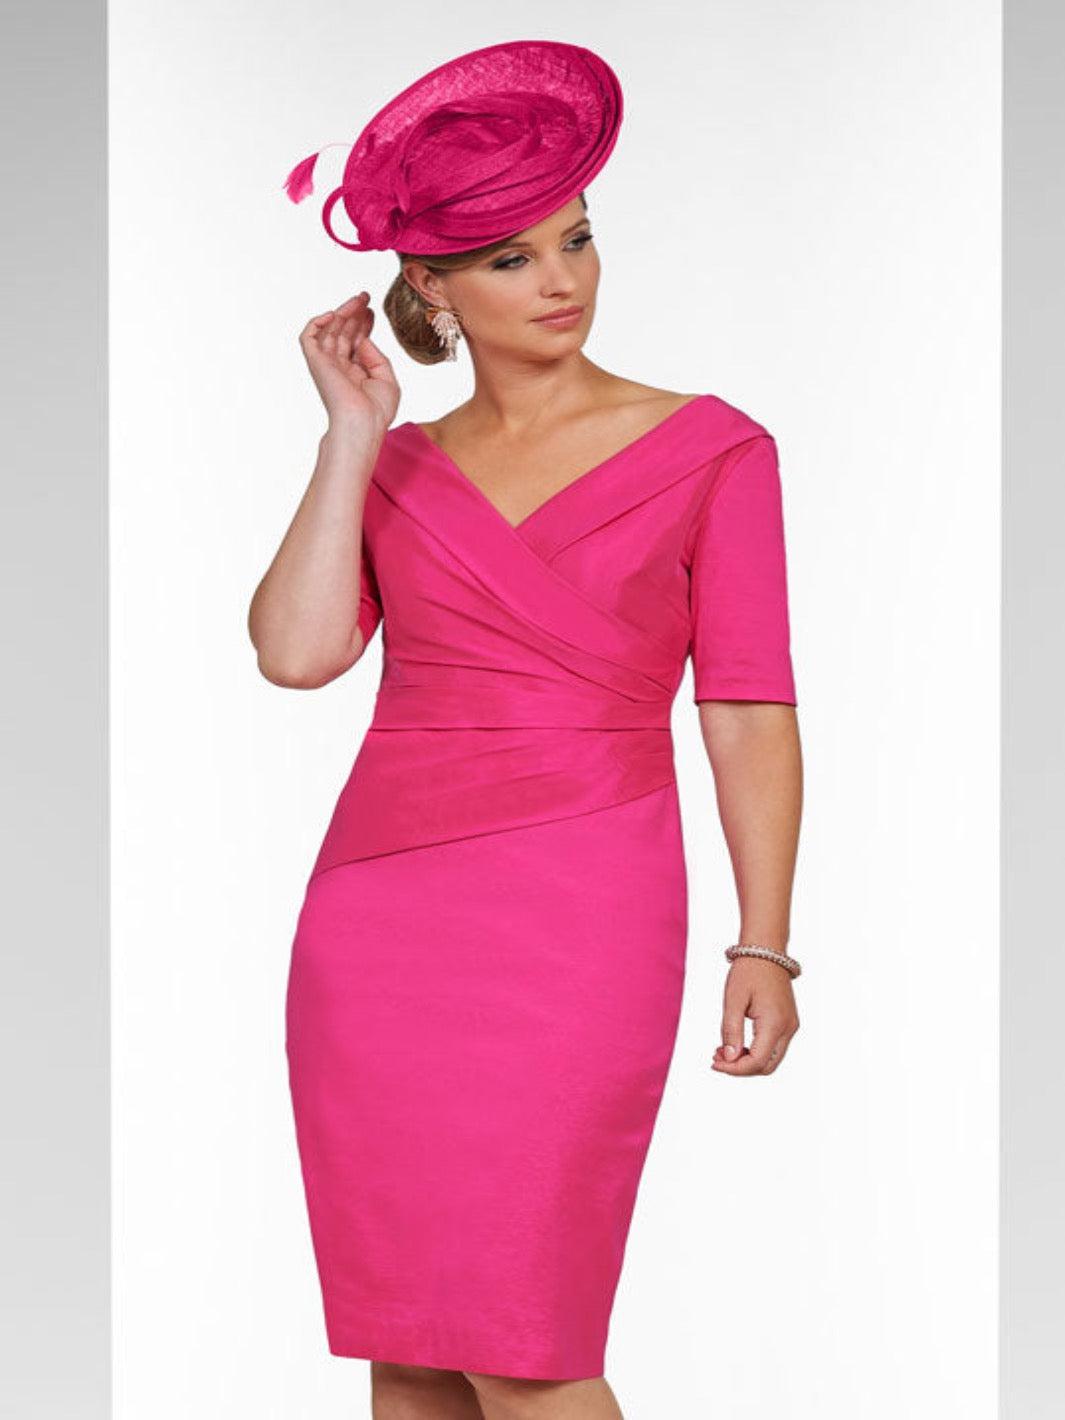 Ispirato Dress In Wineberry ISL821-Mother of the bride- mother of the groom -Nicola Ross